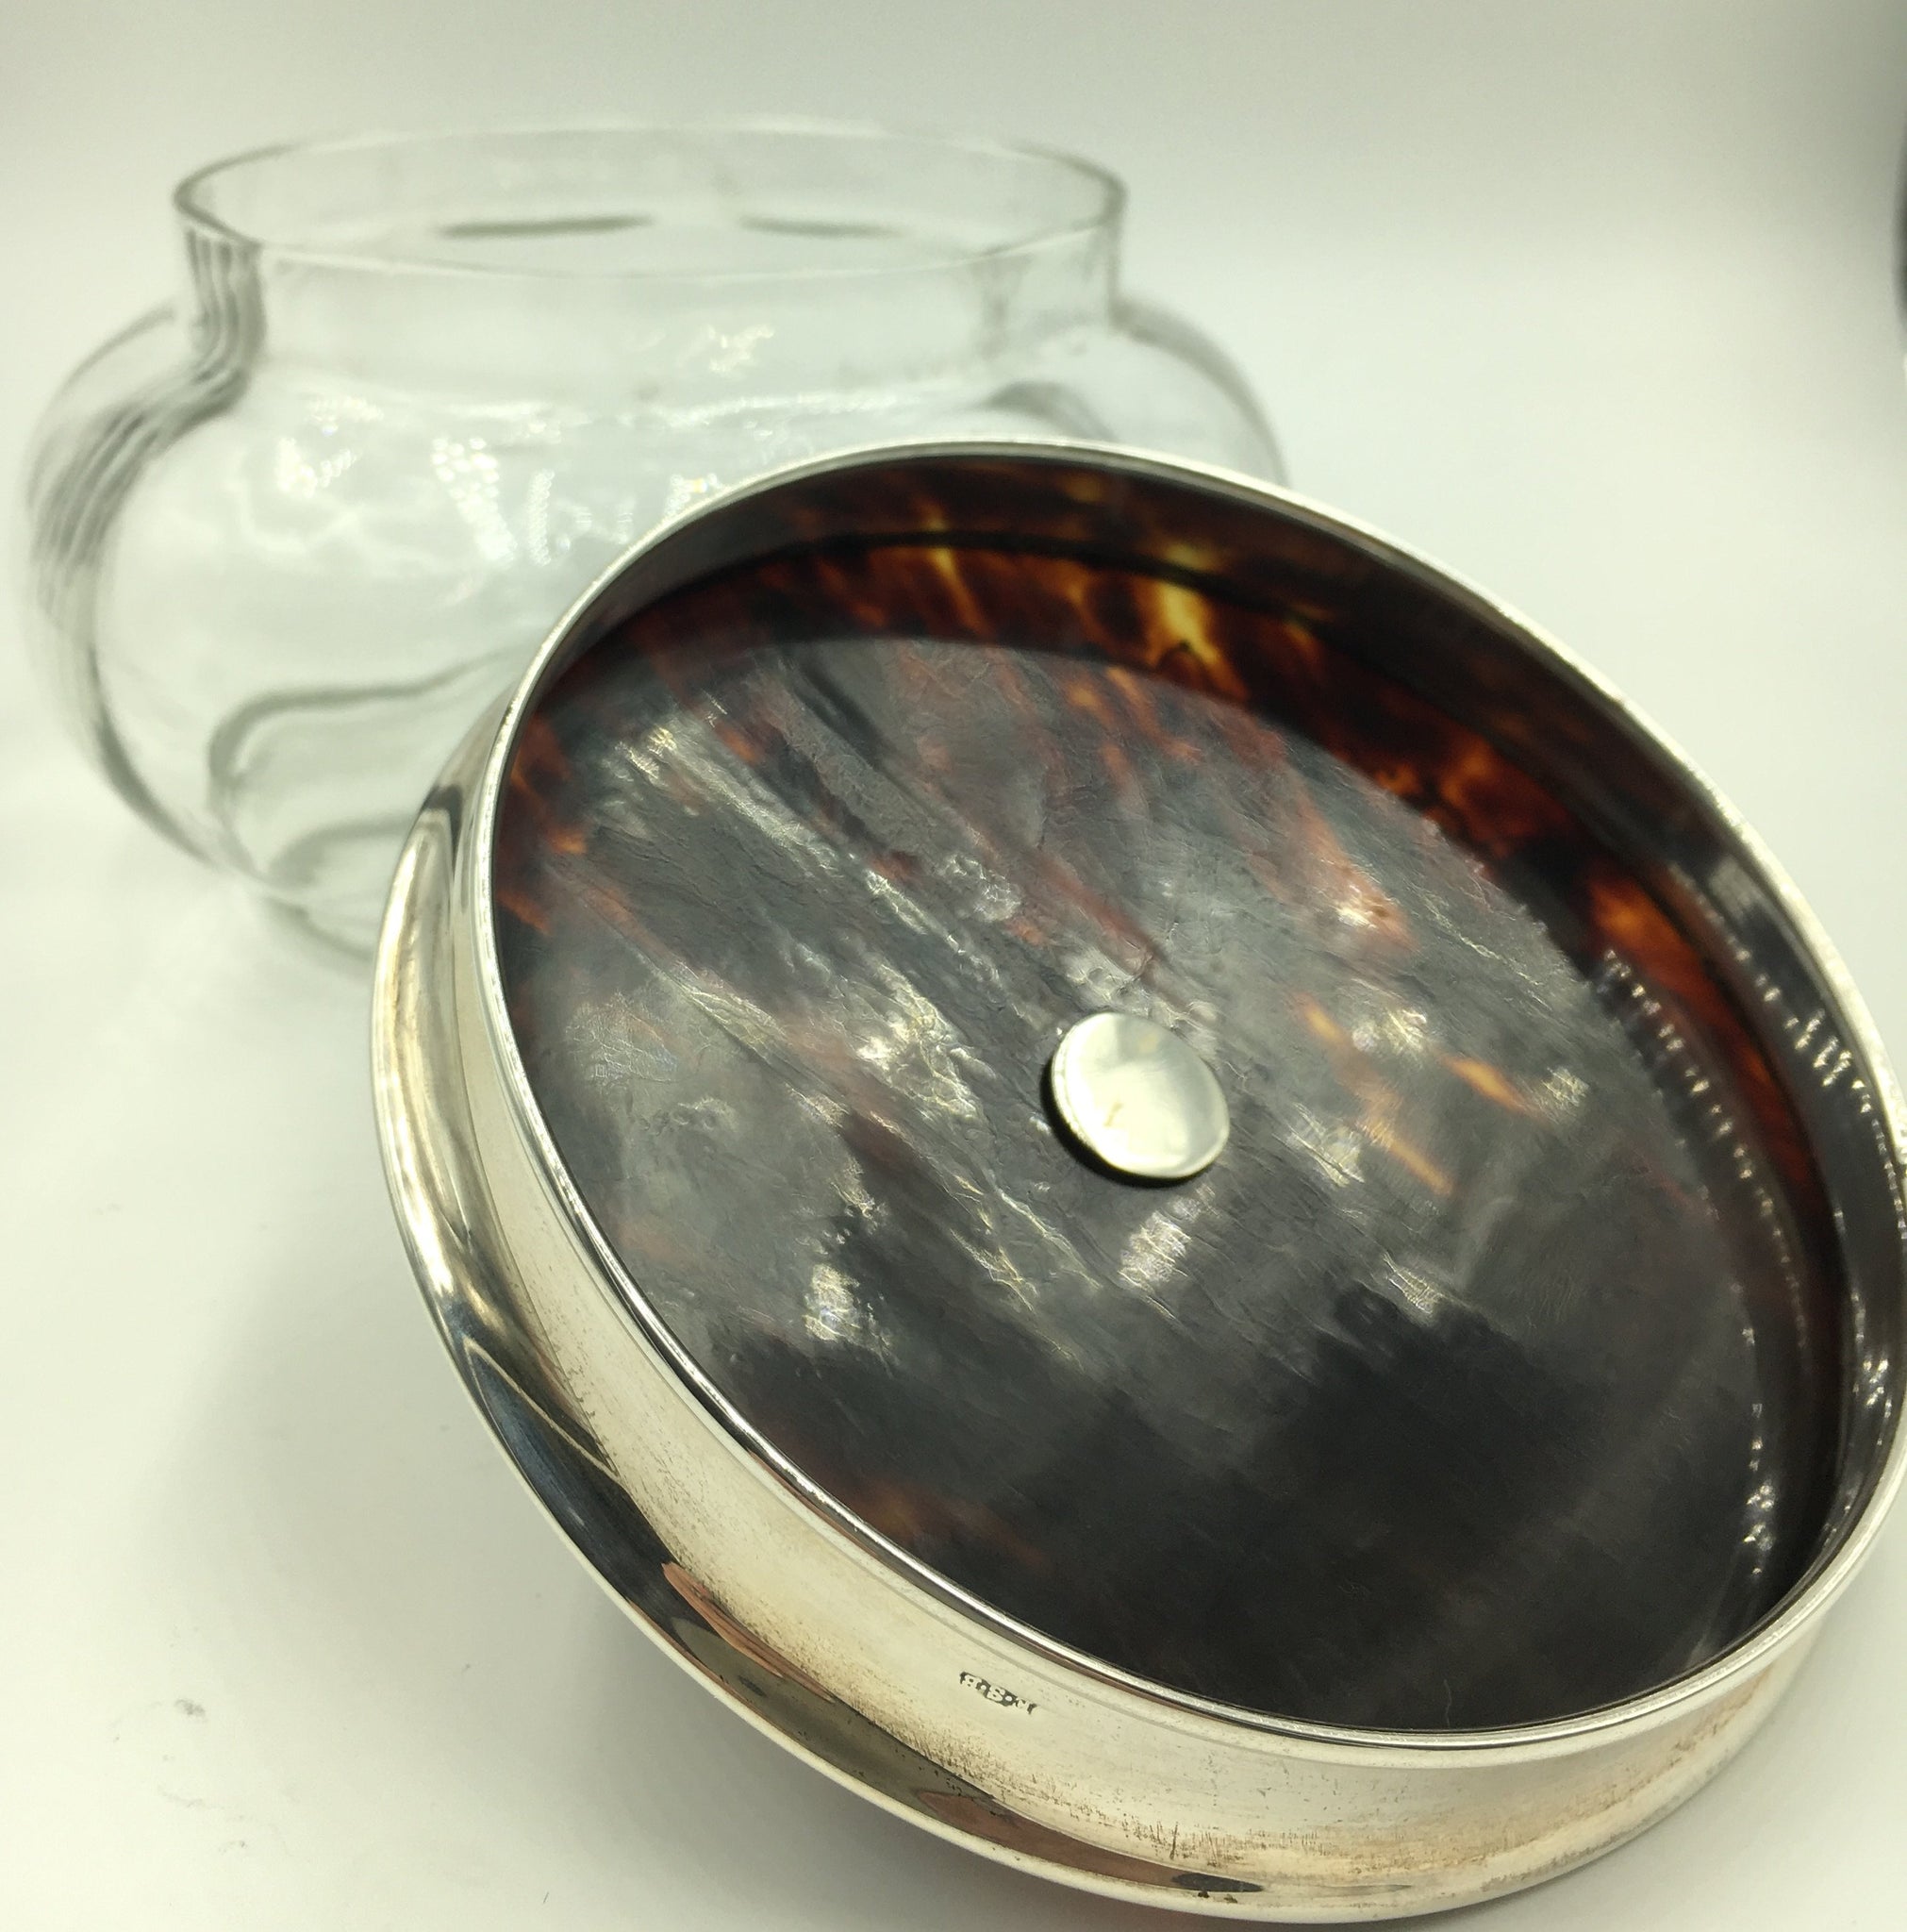 Vintage Glass Dish with Sterling Silver and Faux Tortoise Shell, SUPER SALE, SOLD